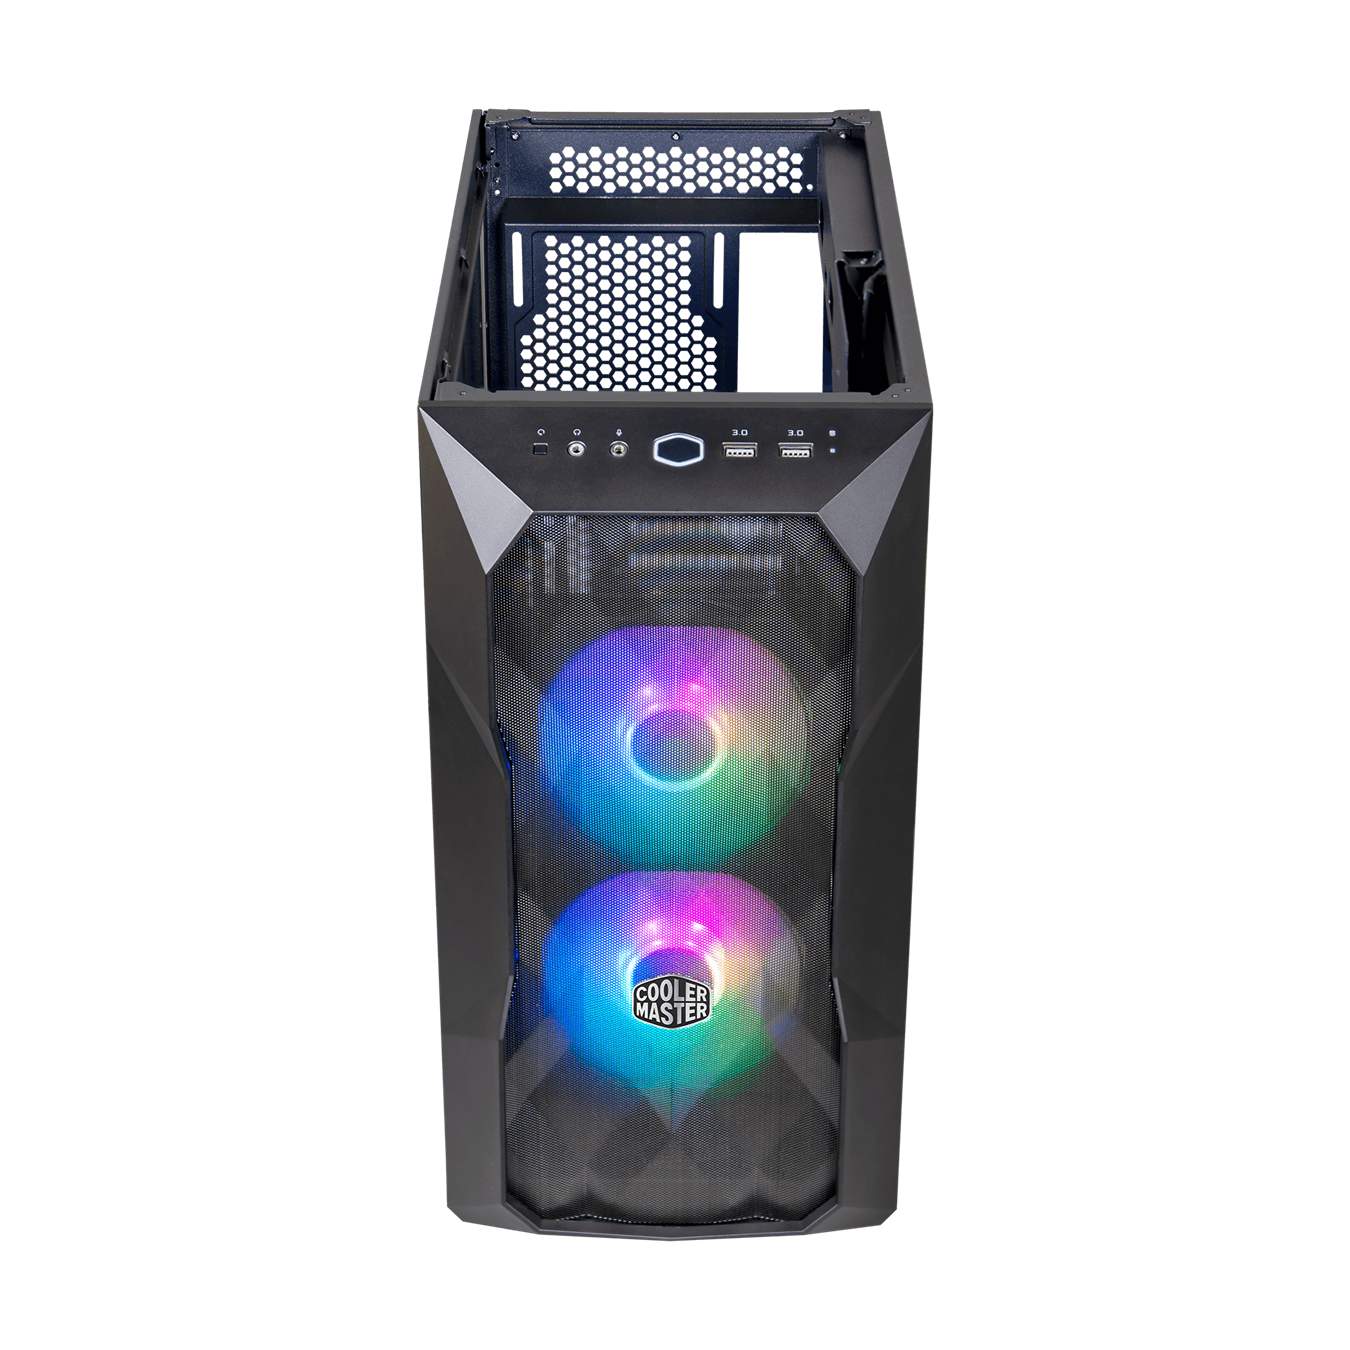 45 degree front view of the black TD300 with mesh front panel and two ARGB SickleFlow fans. 